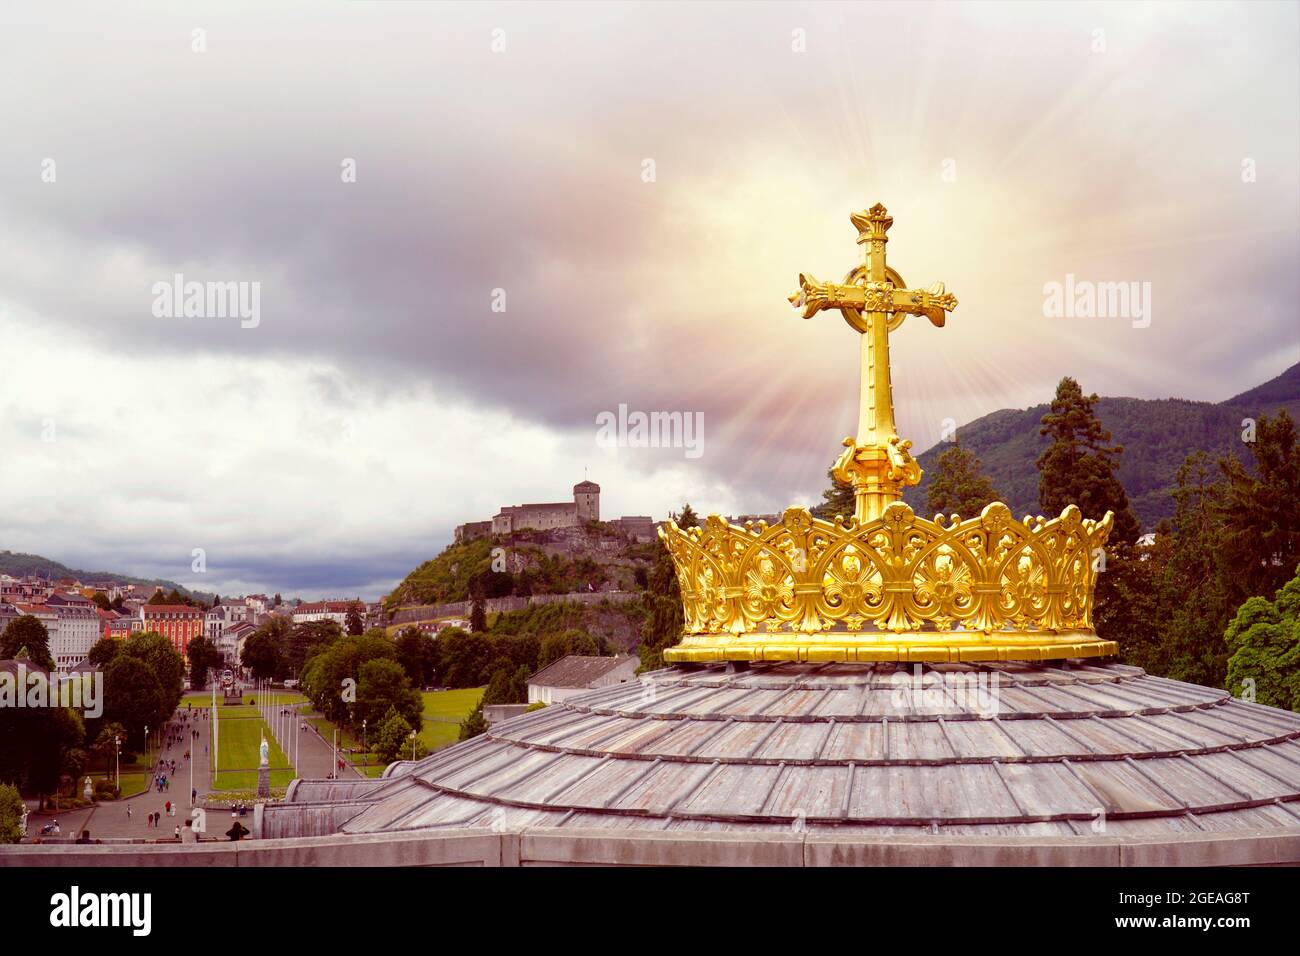 Golden crown and cross on the roof of the Basilica of the Virgen Mary in Lourdes France. The medieval castle in background. Stock Photo